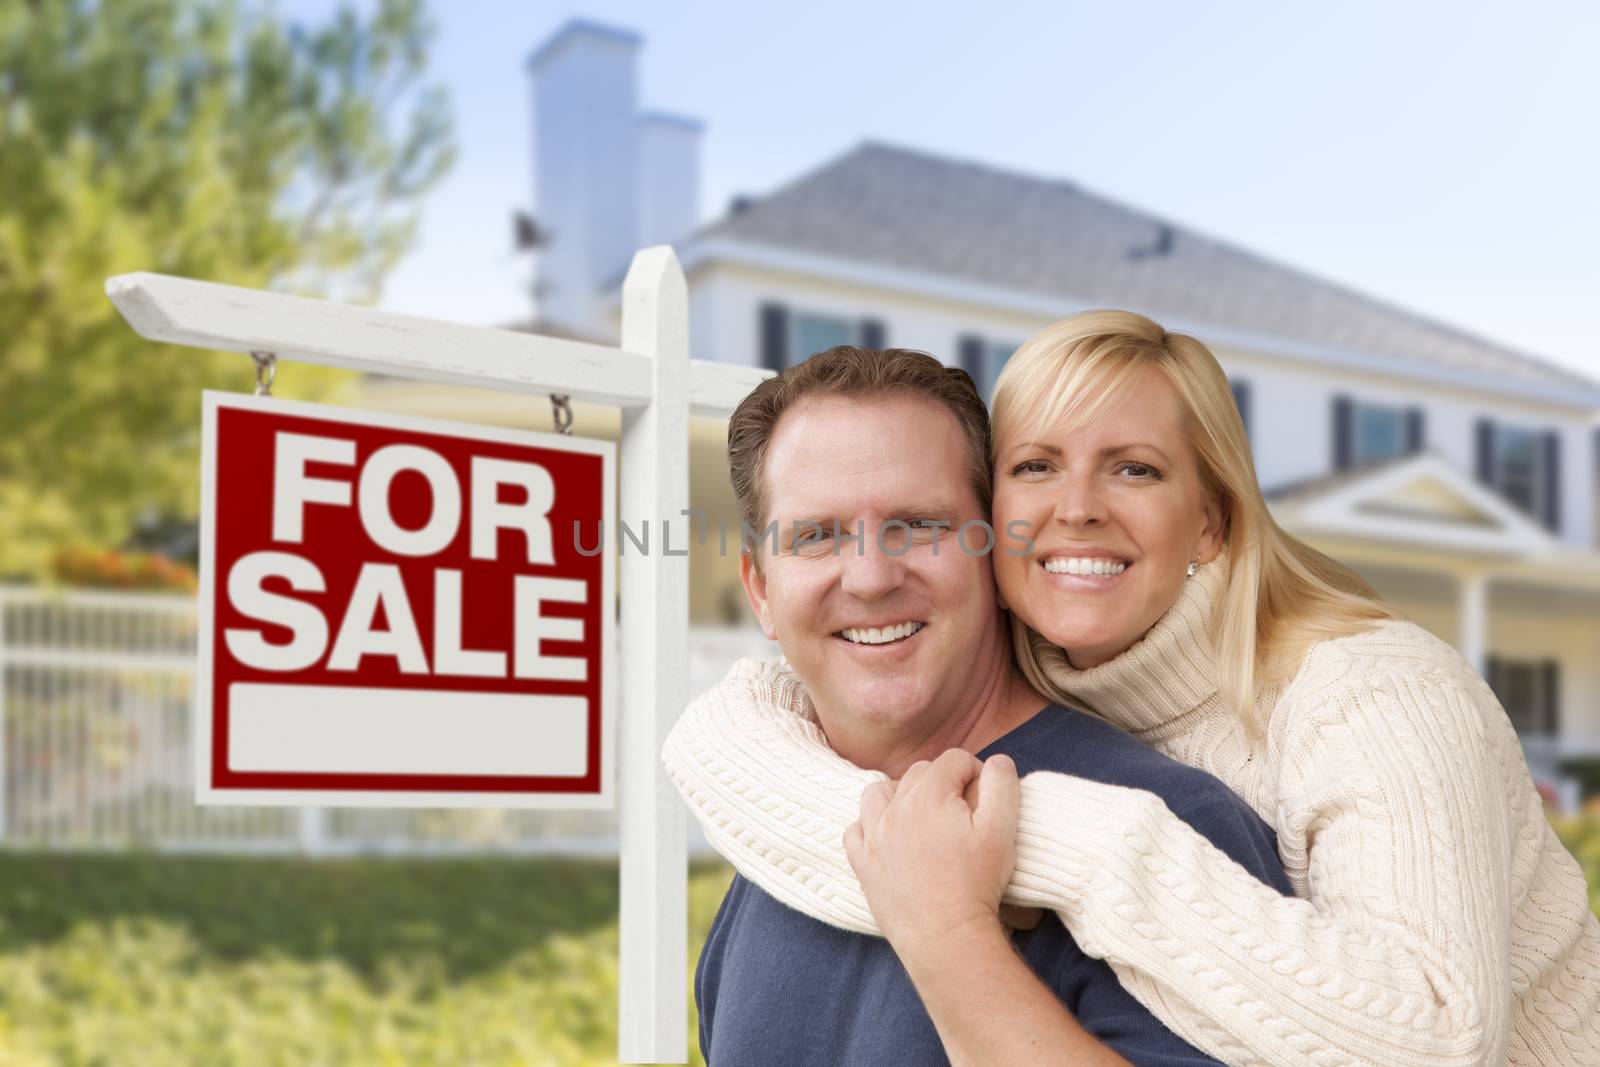 Affectionate Happy Couple in Front of New House and For Sale Real Estate Sign.